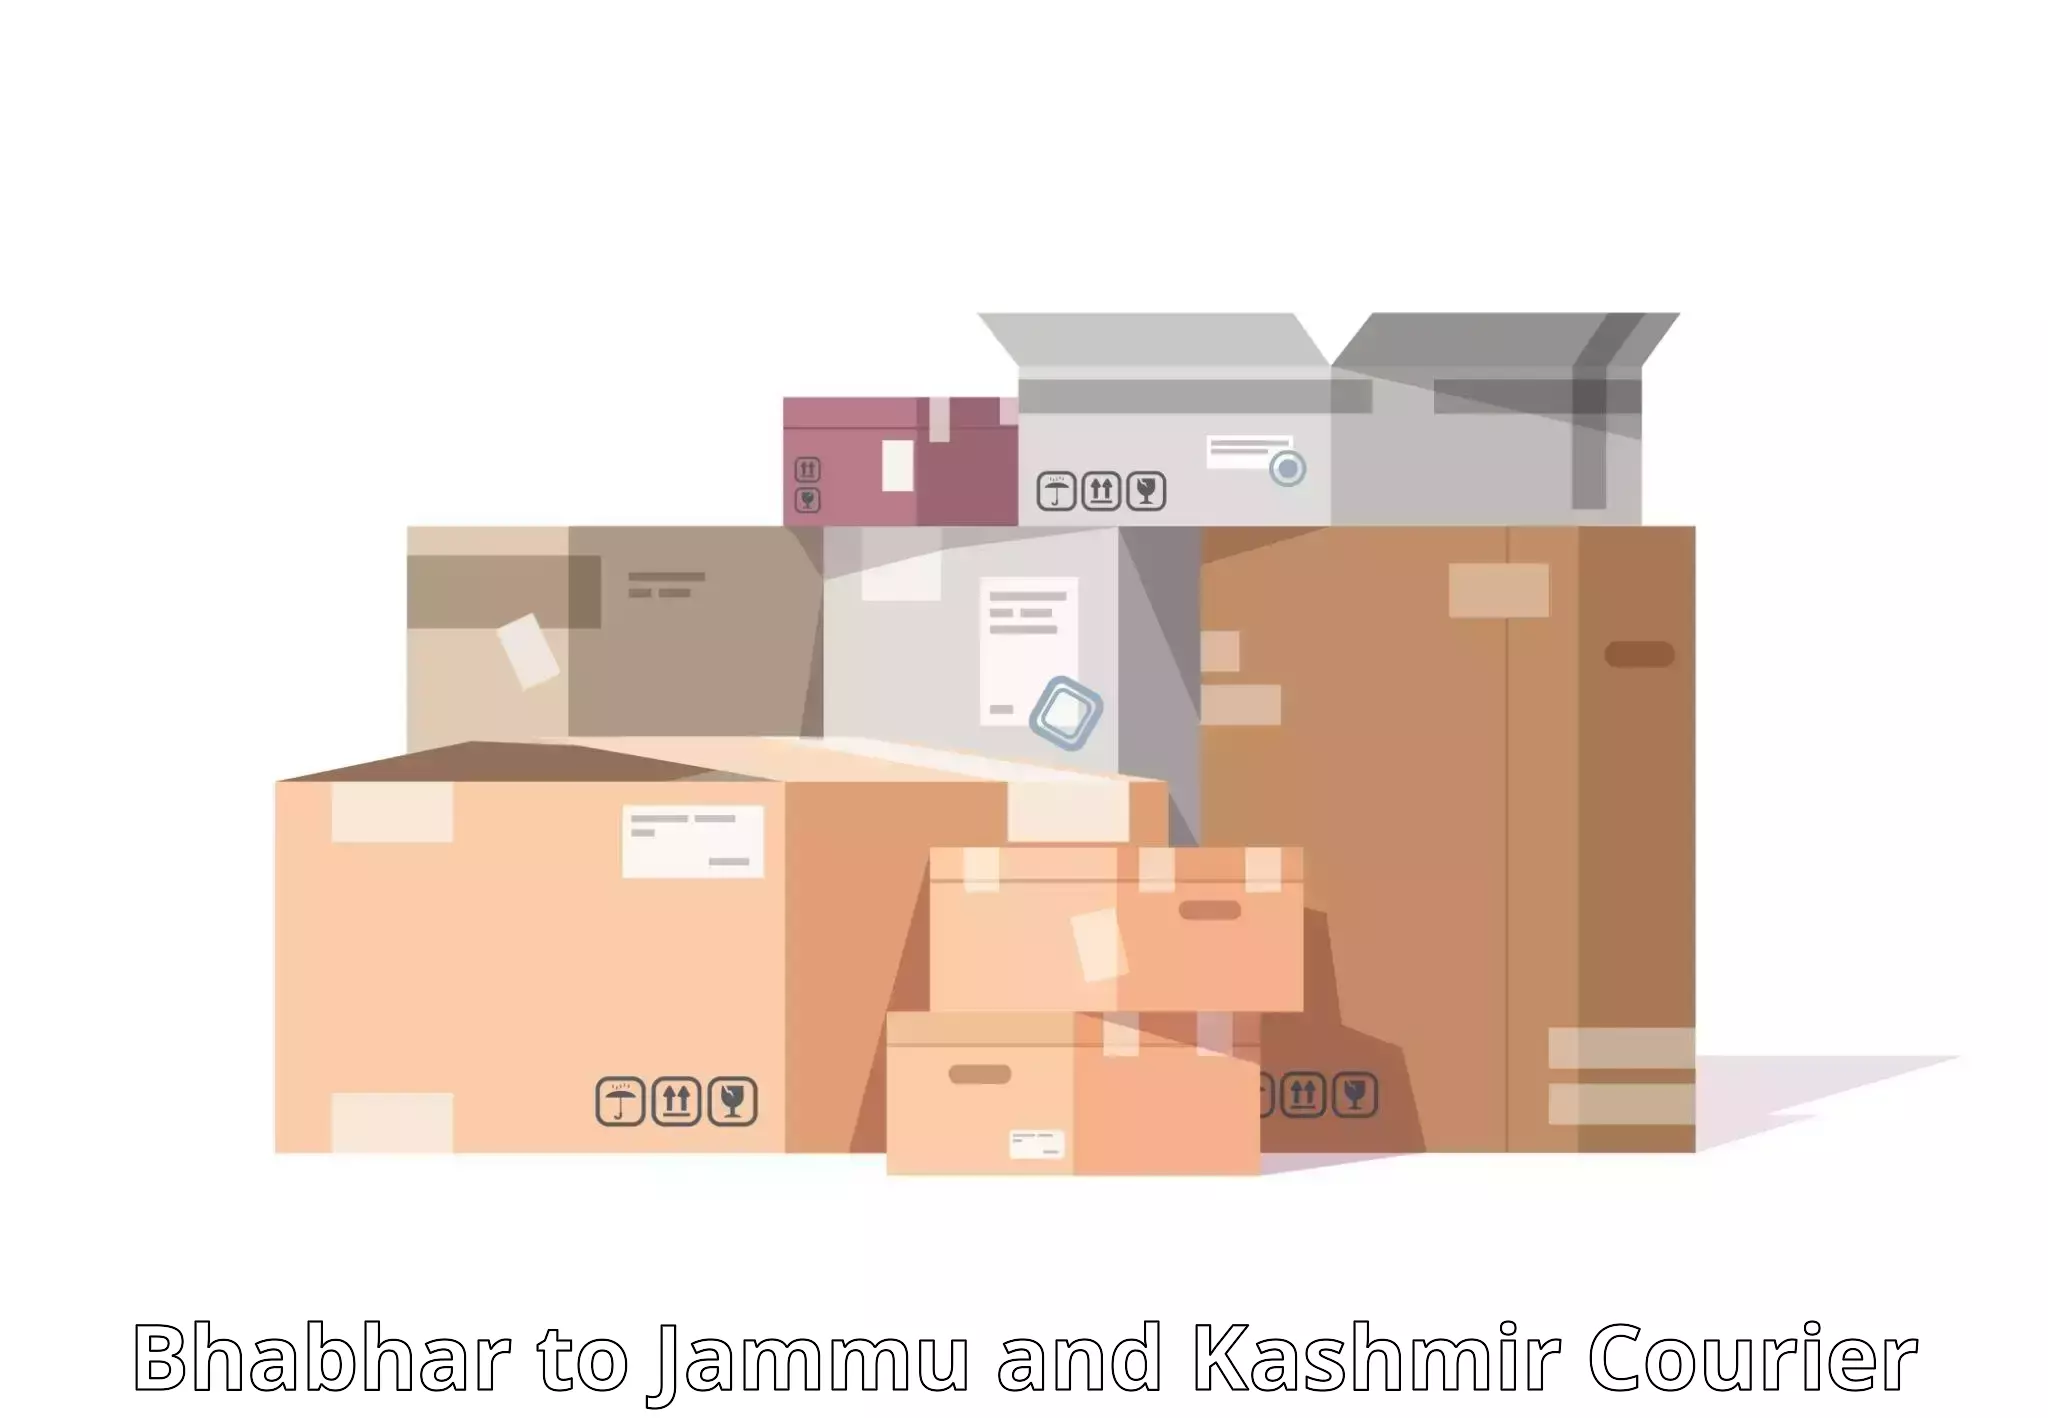 Next-day delivery options Bhabhar to University of Jammu